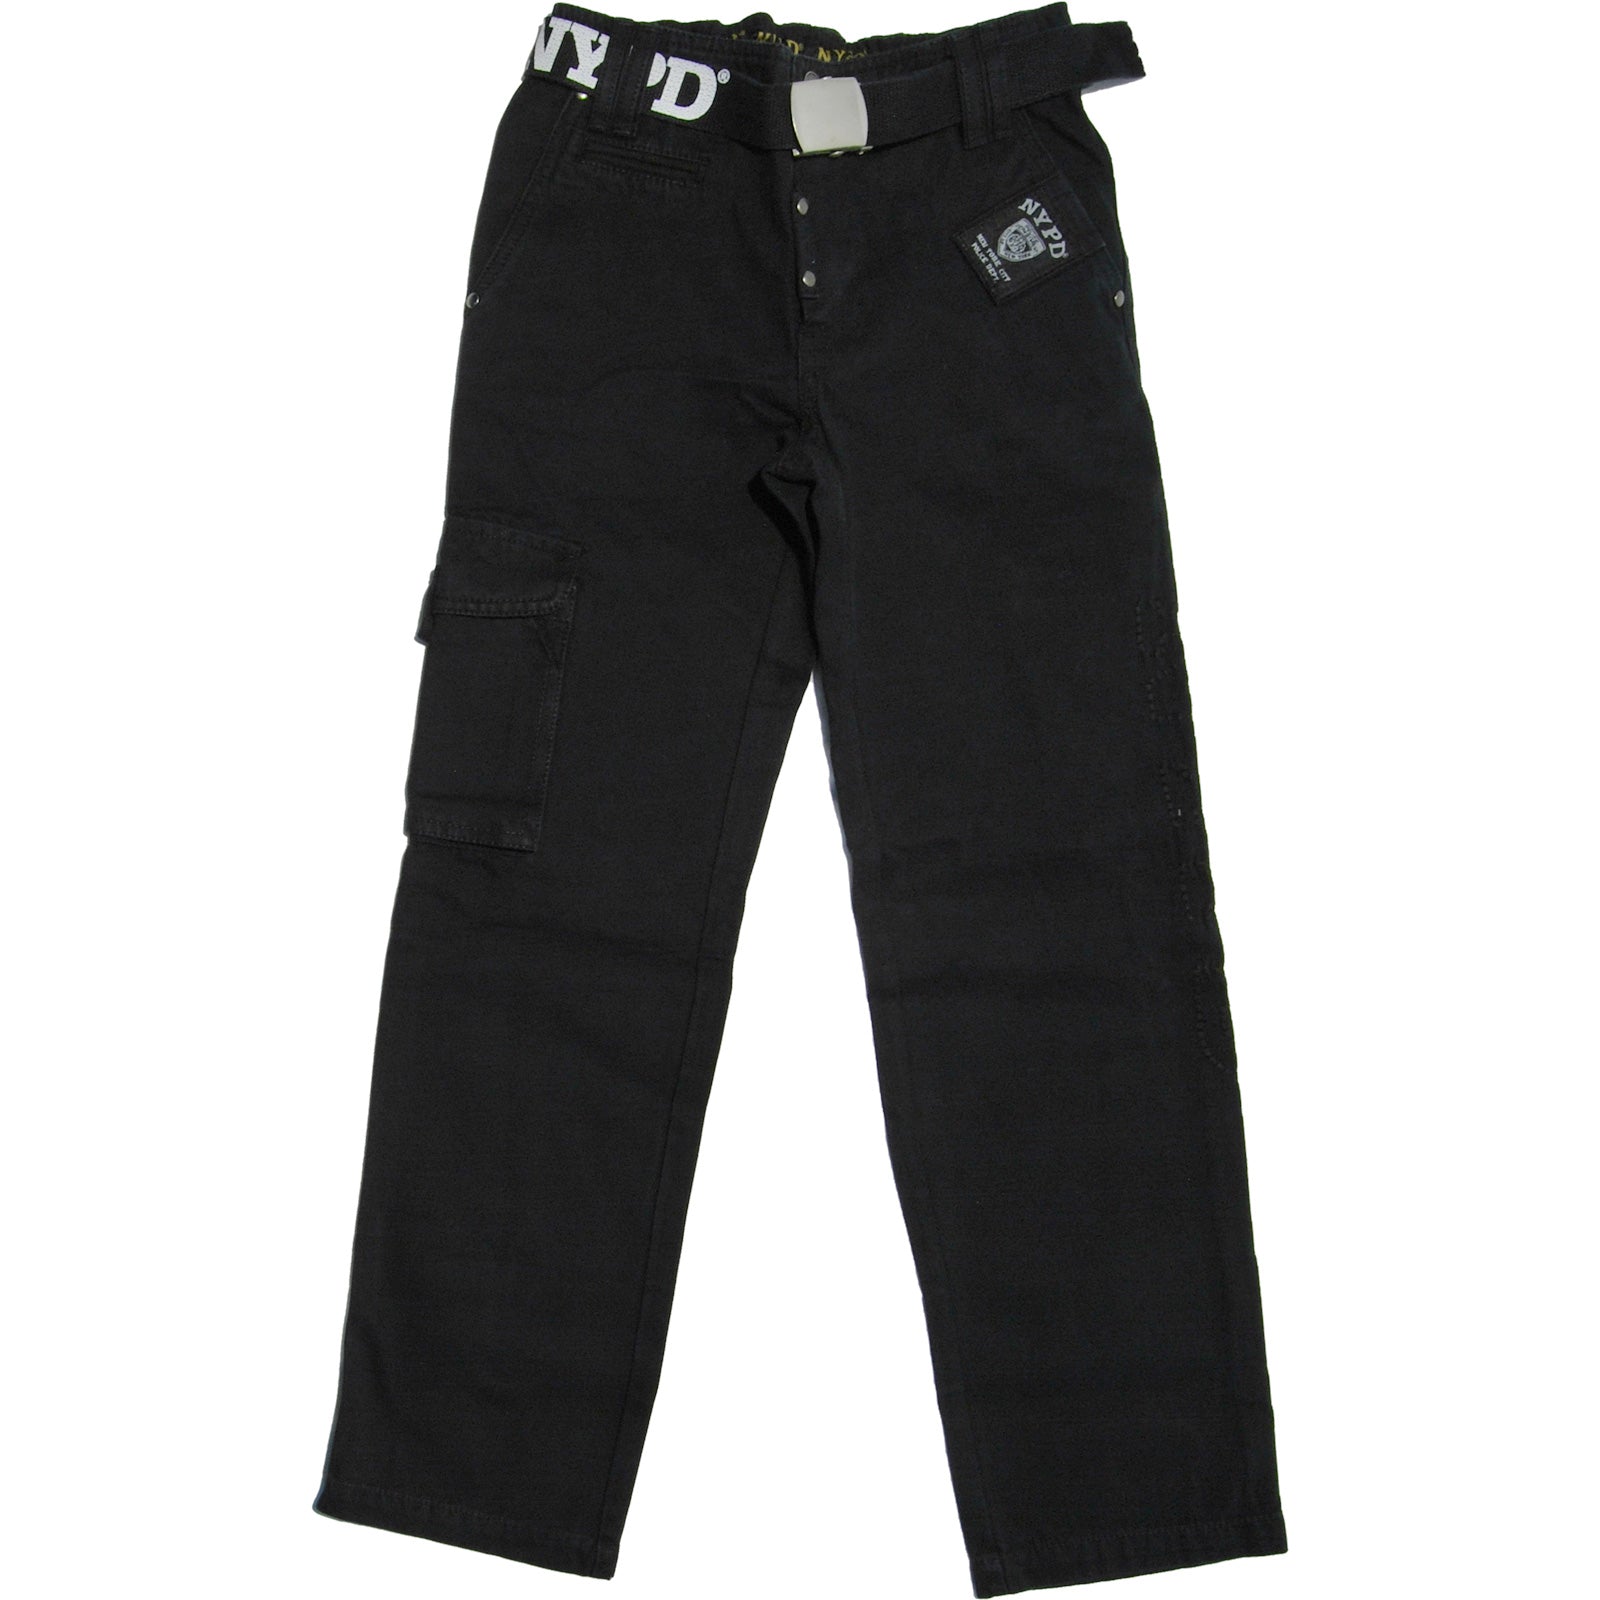 
  Regular 5-pocket trousers from the children's clothing line Mirtillo, with side pocket, NYPD l...